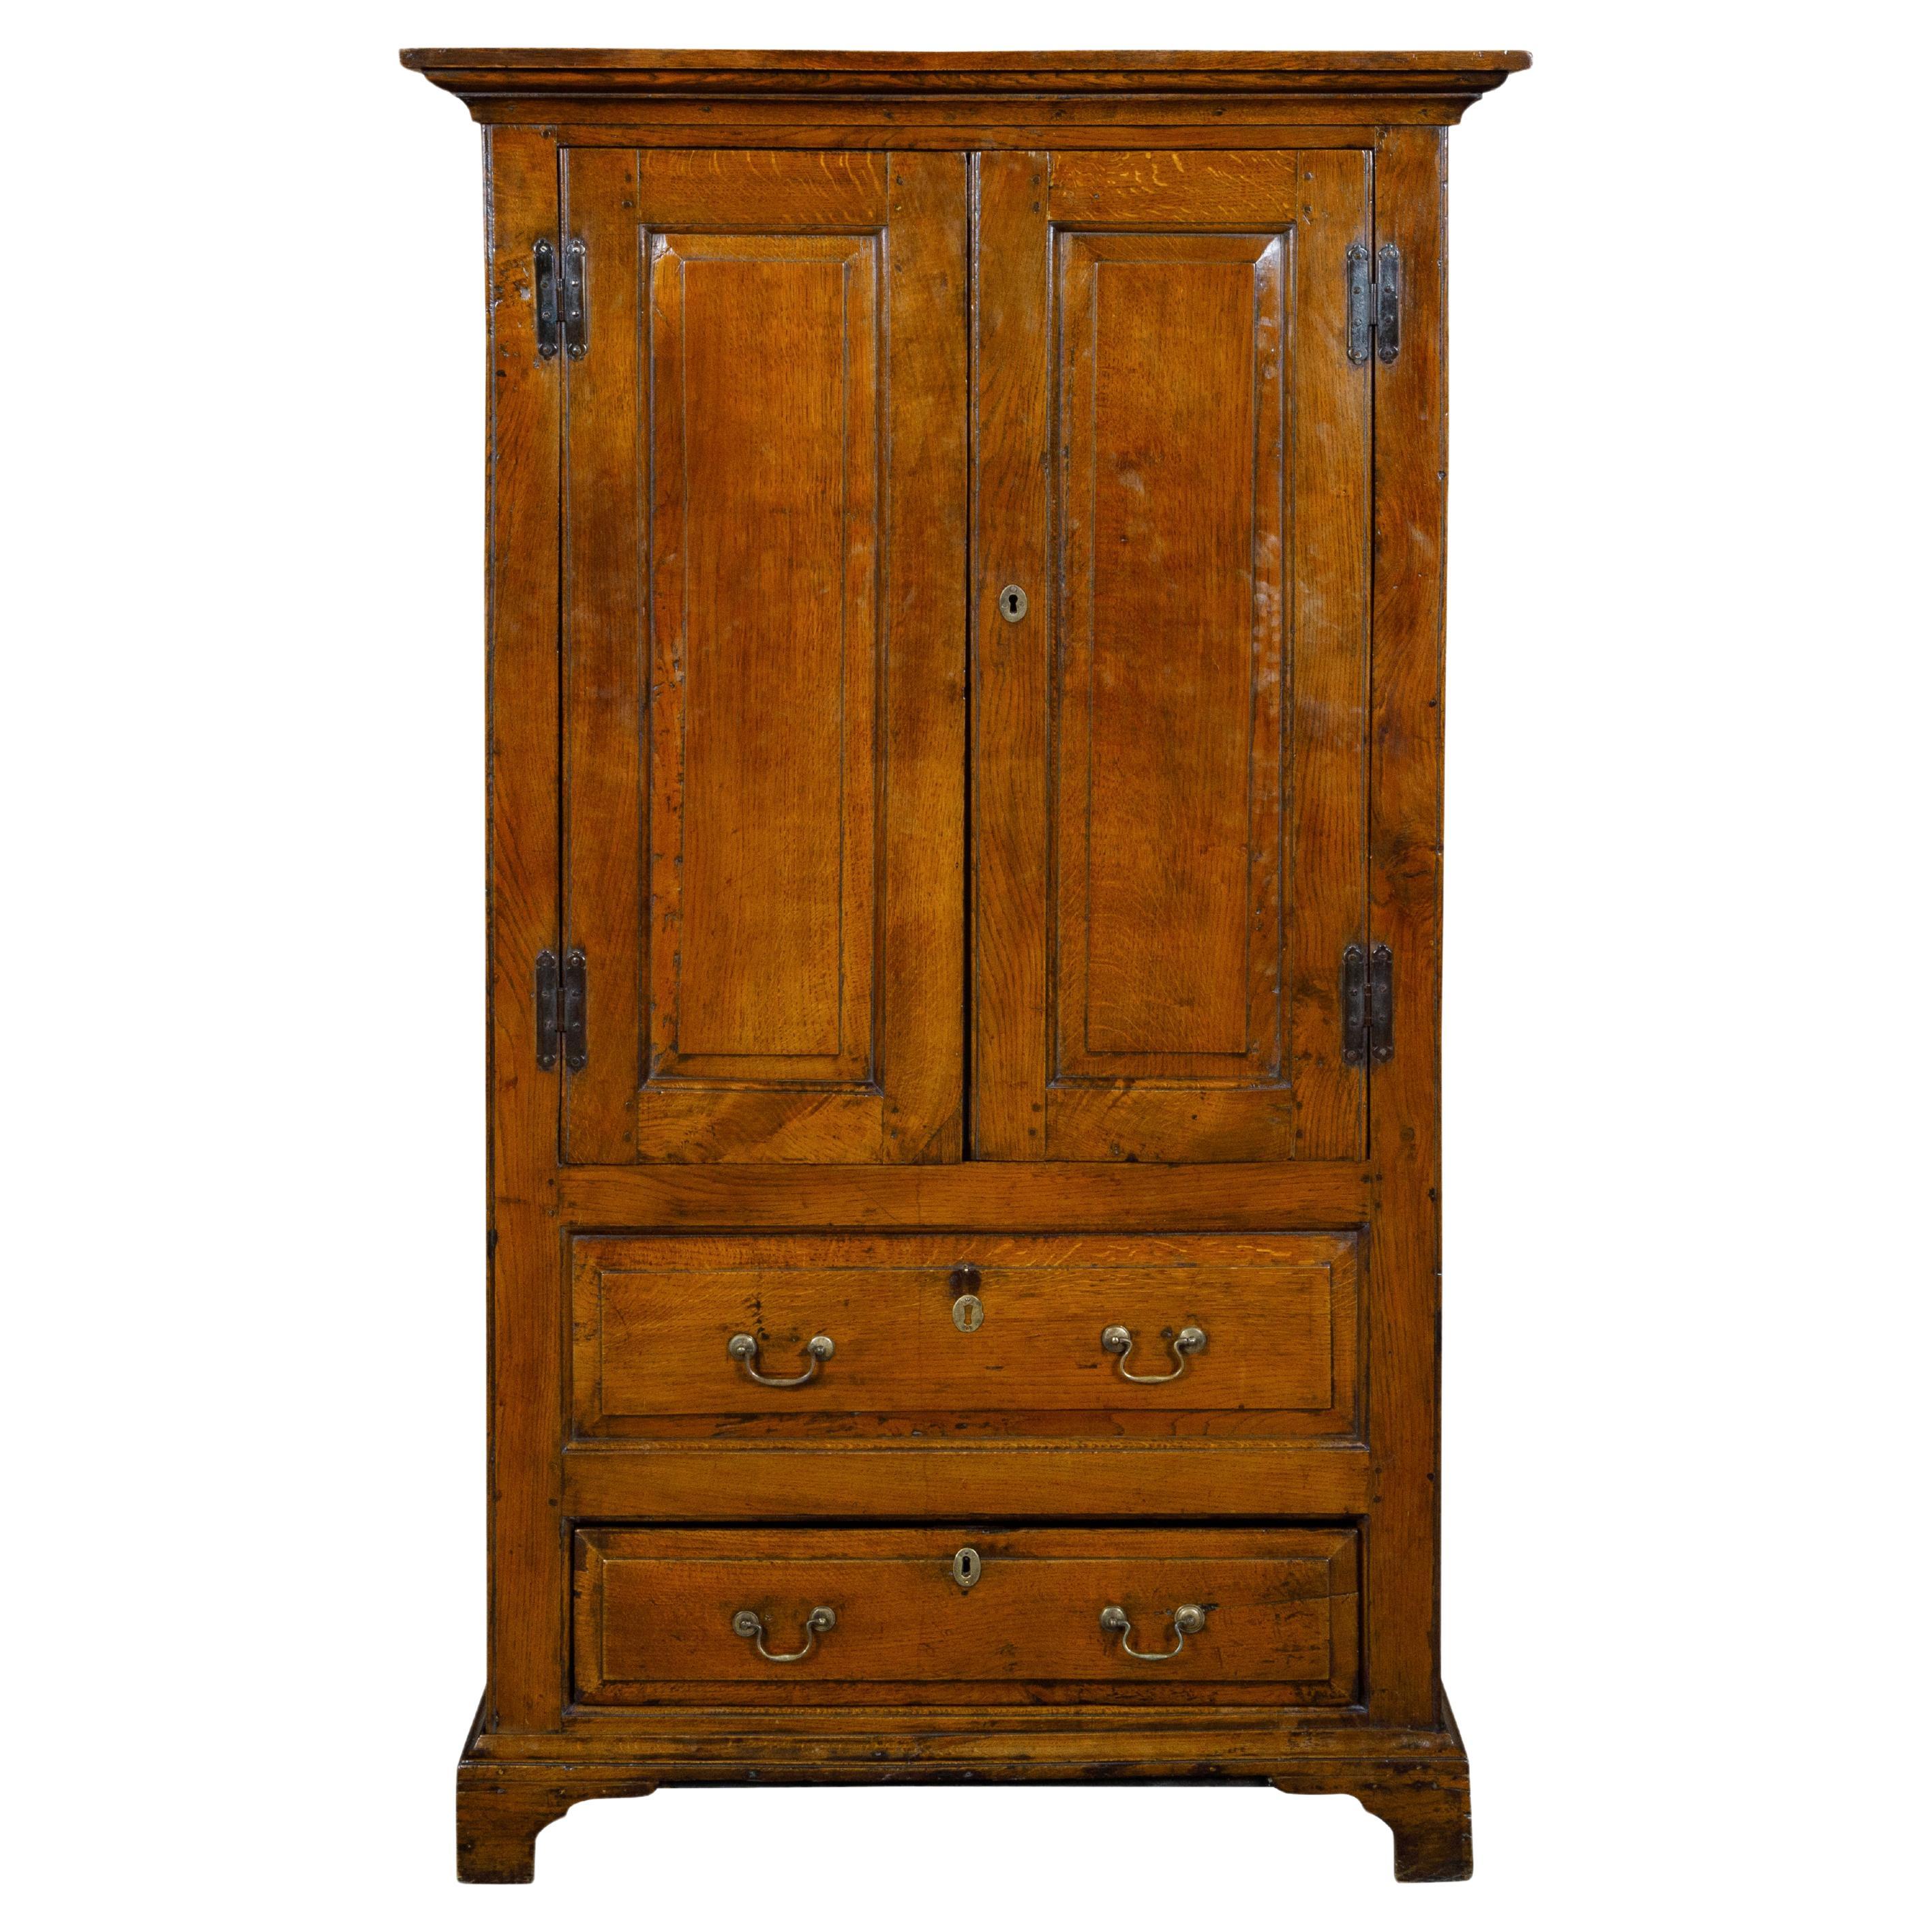 19th Century English Oak Armoire with Carved Doors, Bracket Feet, Brass Hardware For Sale